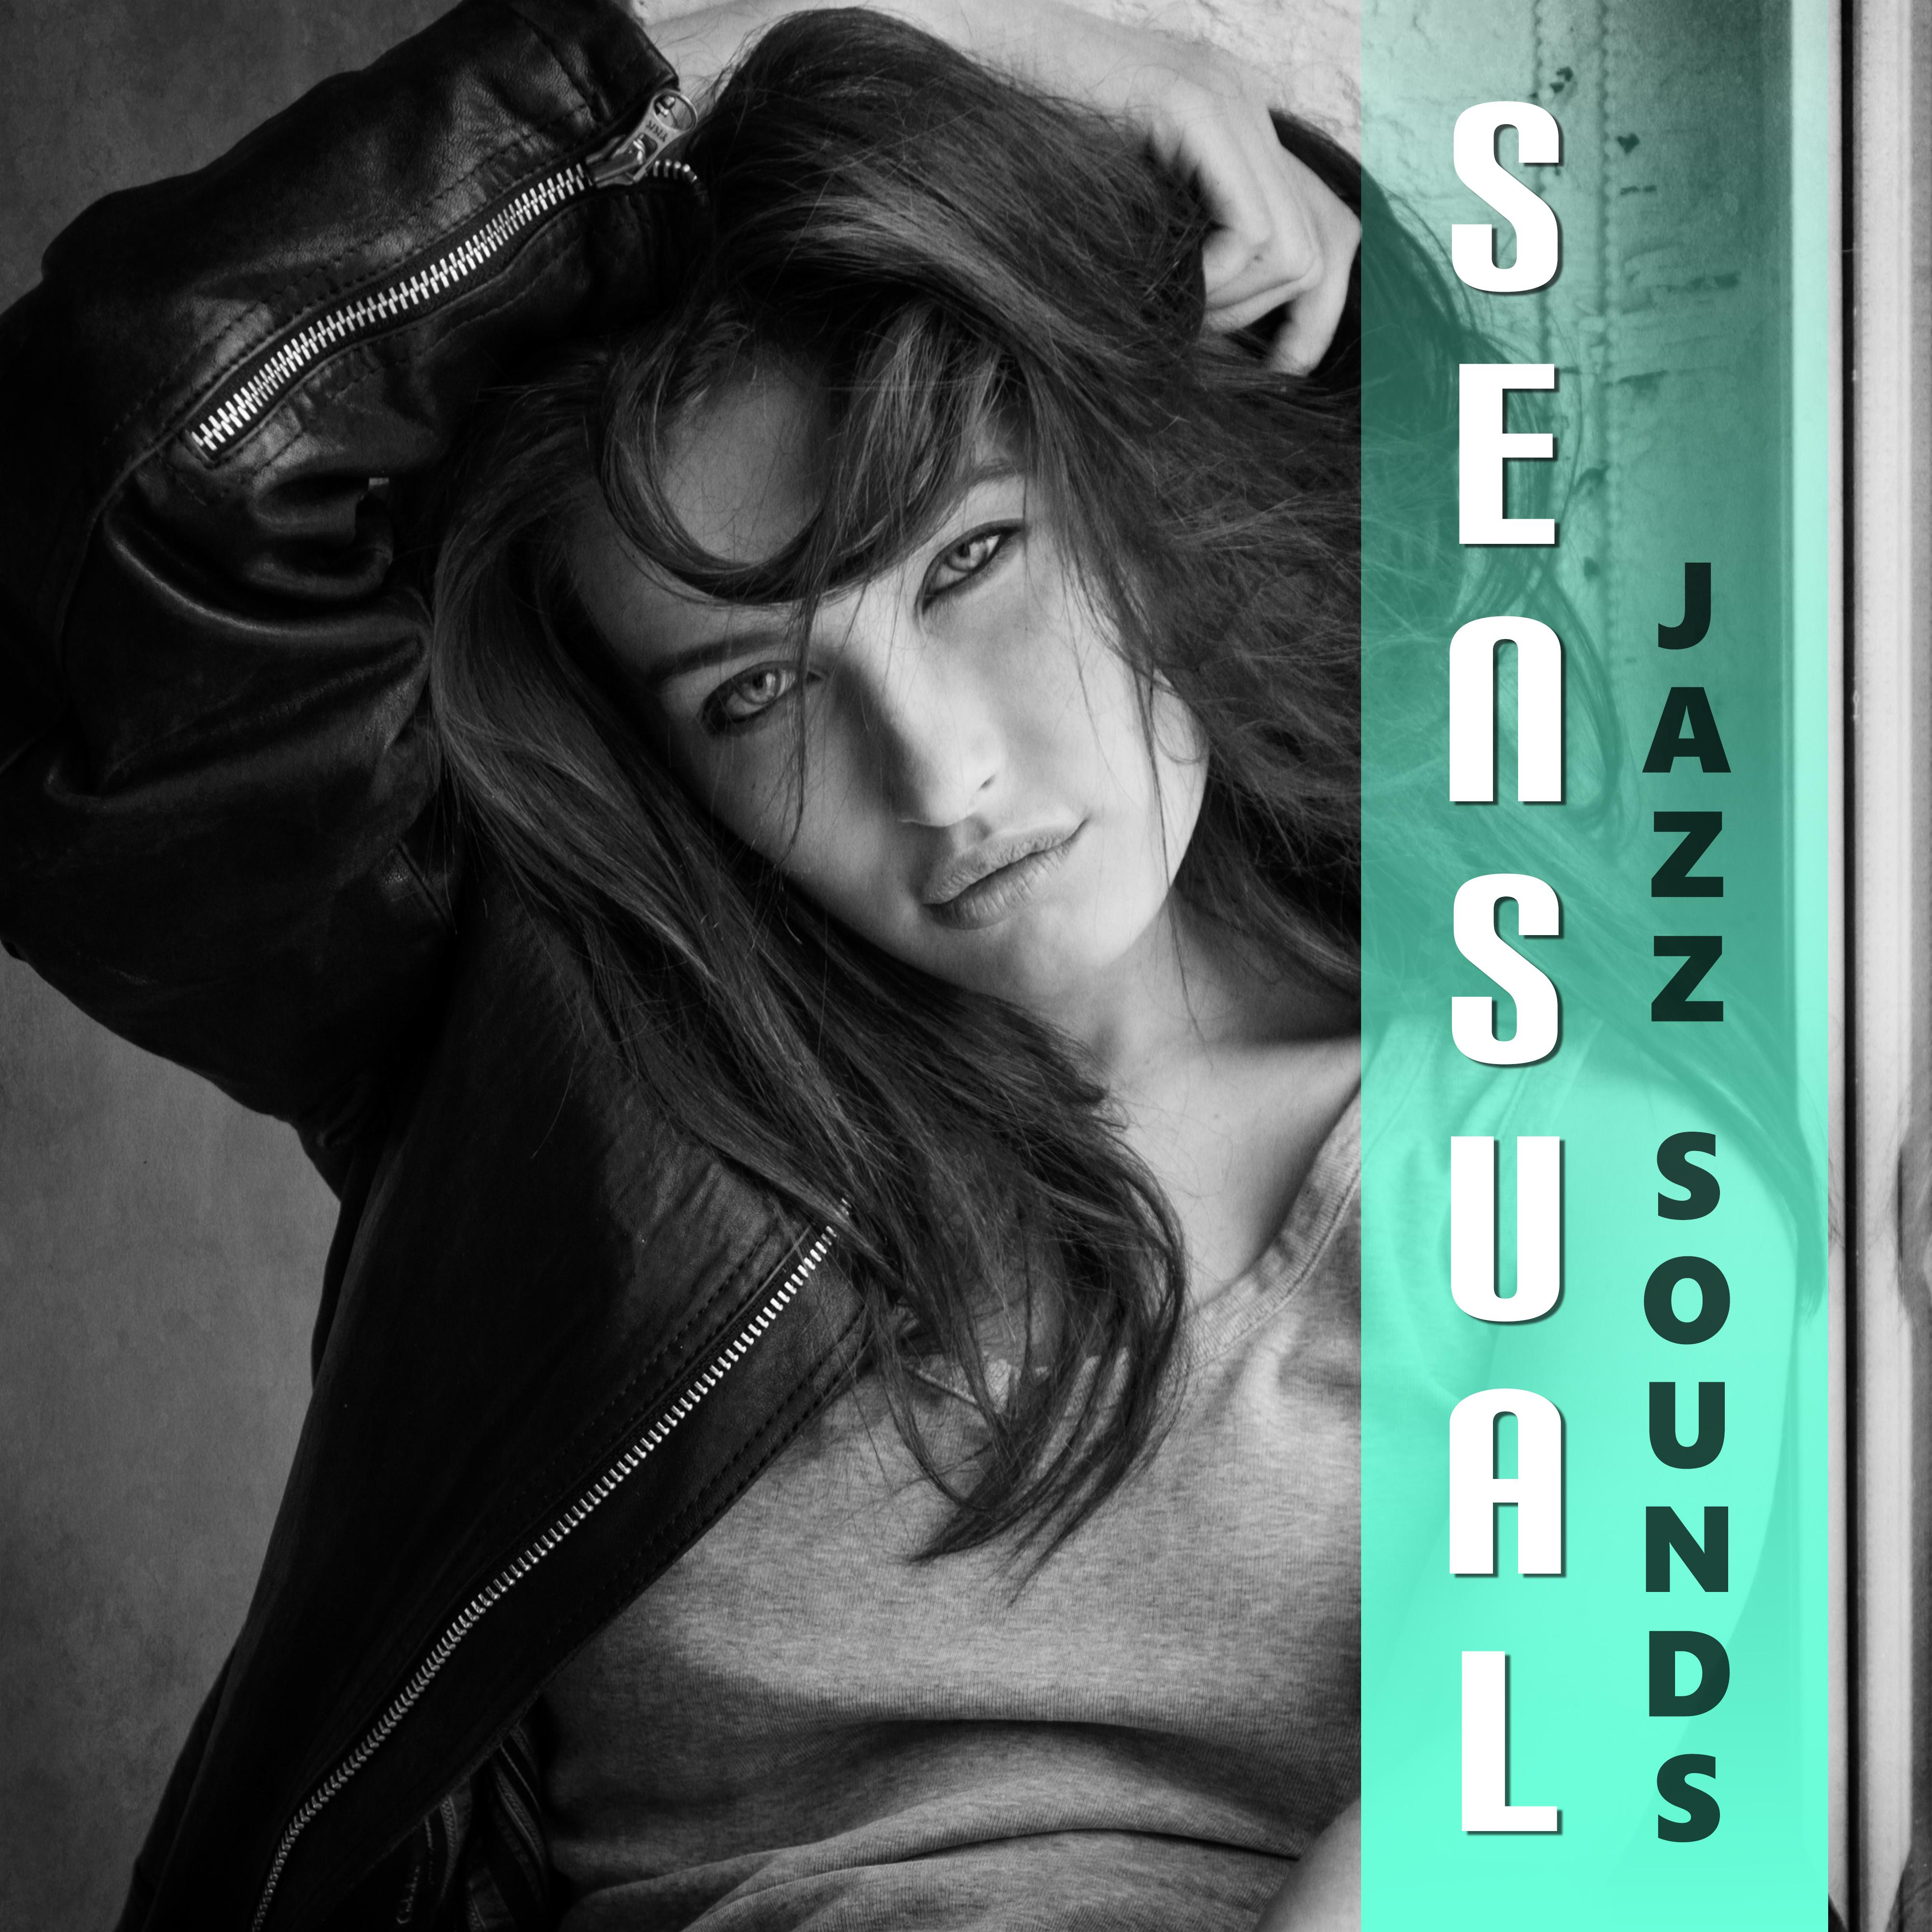 Sensual Jazz Sounds  Jazz Music, Sounds for Lovers, Hot Romance, Sensual Instrumental Note